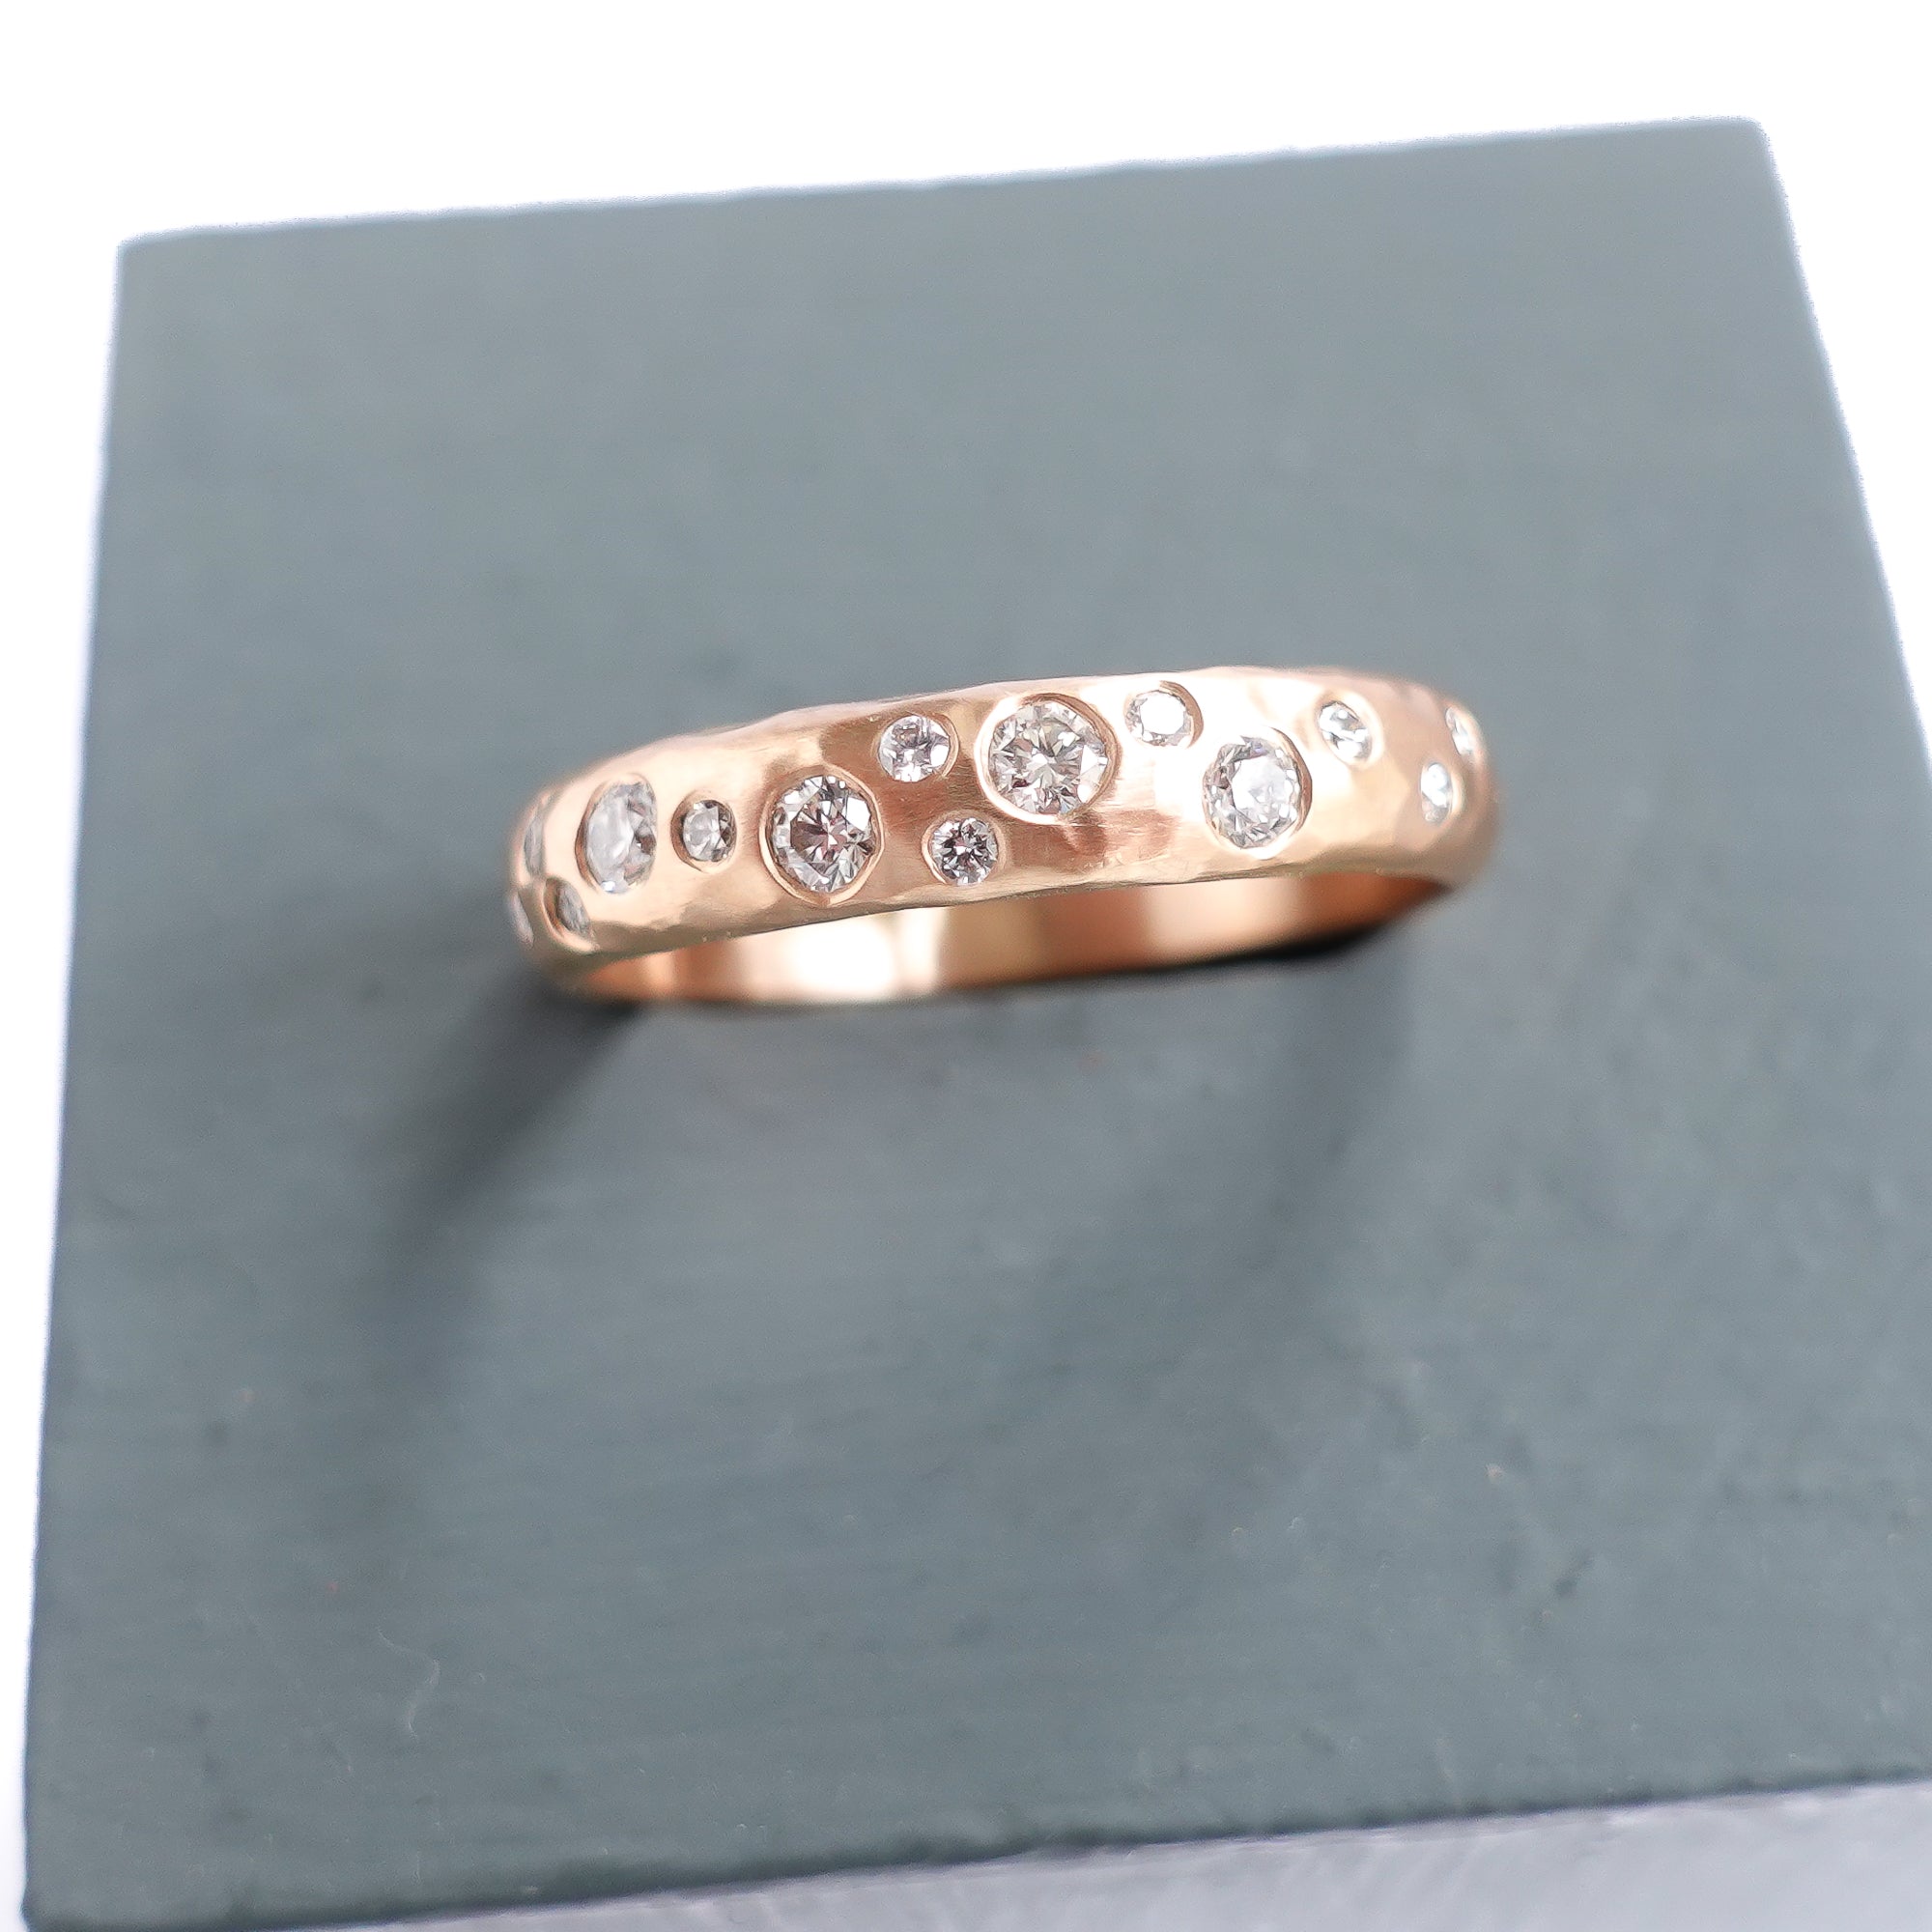 A modern unique rose gold eternity ring with 14 diamonds. Beautiful contemporary eternity ring, perfect for everyday wear.